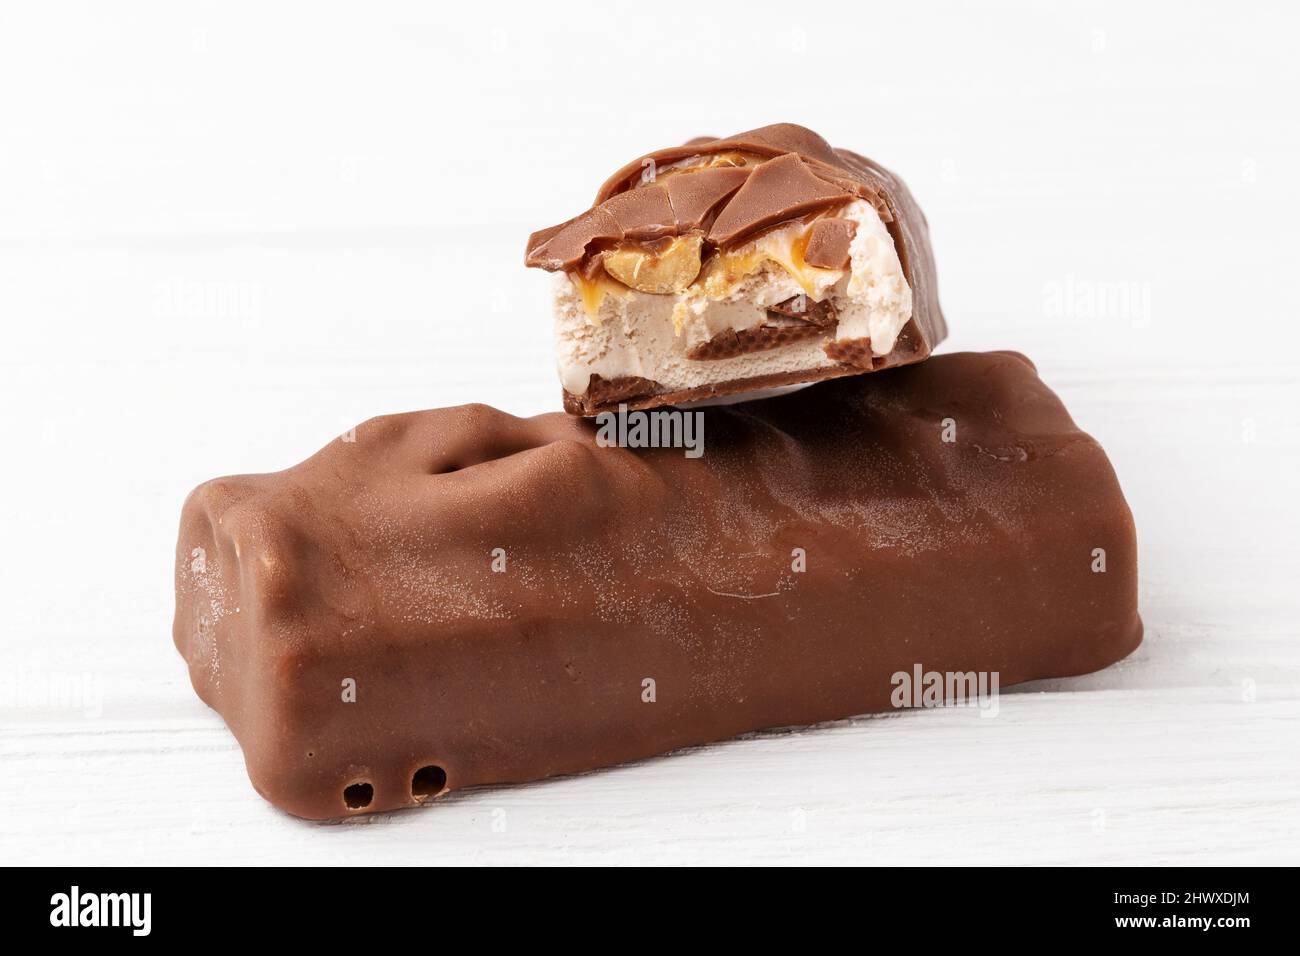 Two chocolate ice cream bars with caramel and peanuts on white background close up macro shot Stock Photo